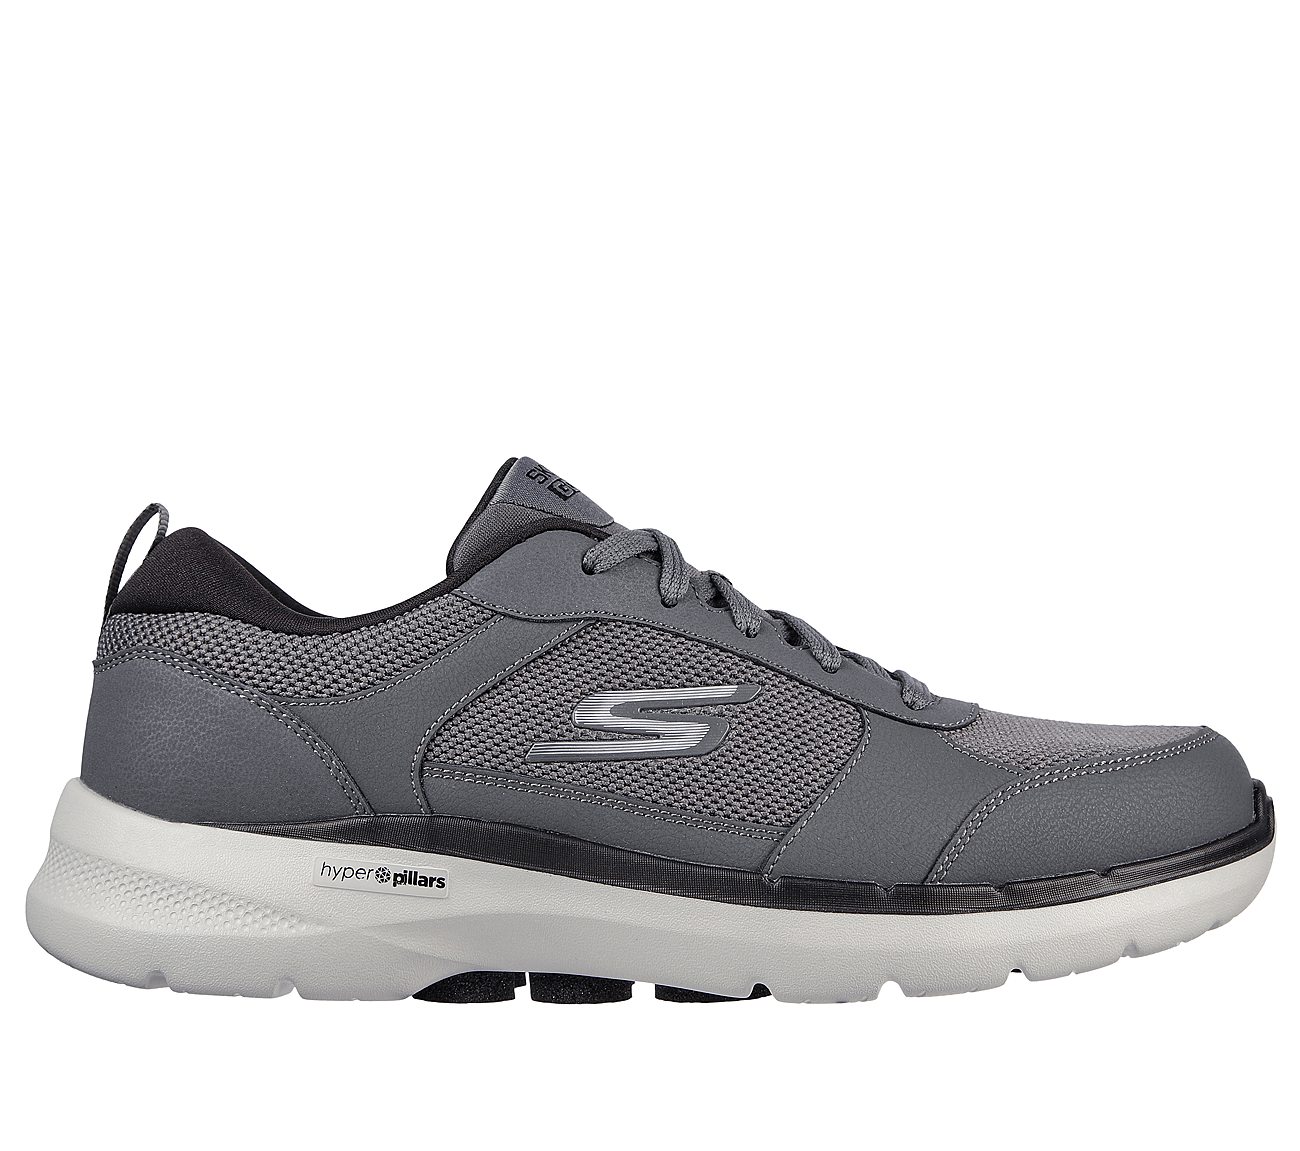 GO WALK 6 - COMPETE, CHARCOAL/BLACK Footwear Lateral View